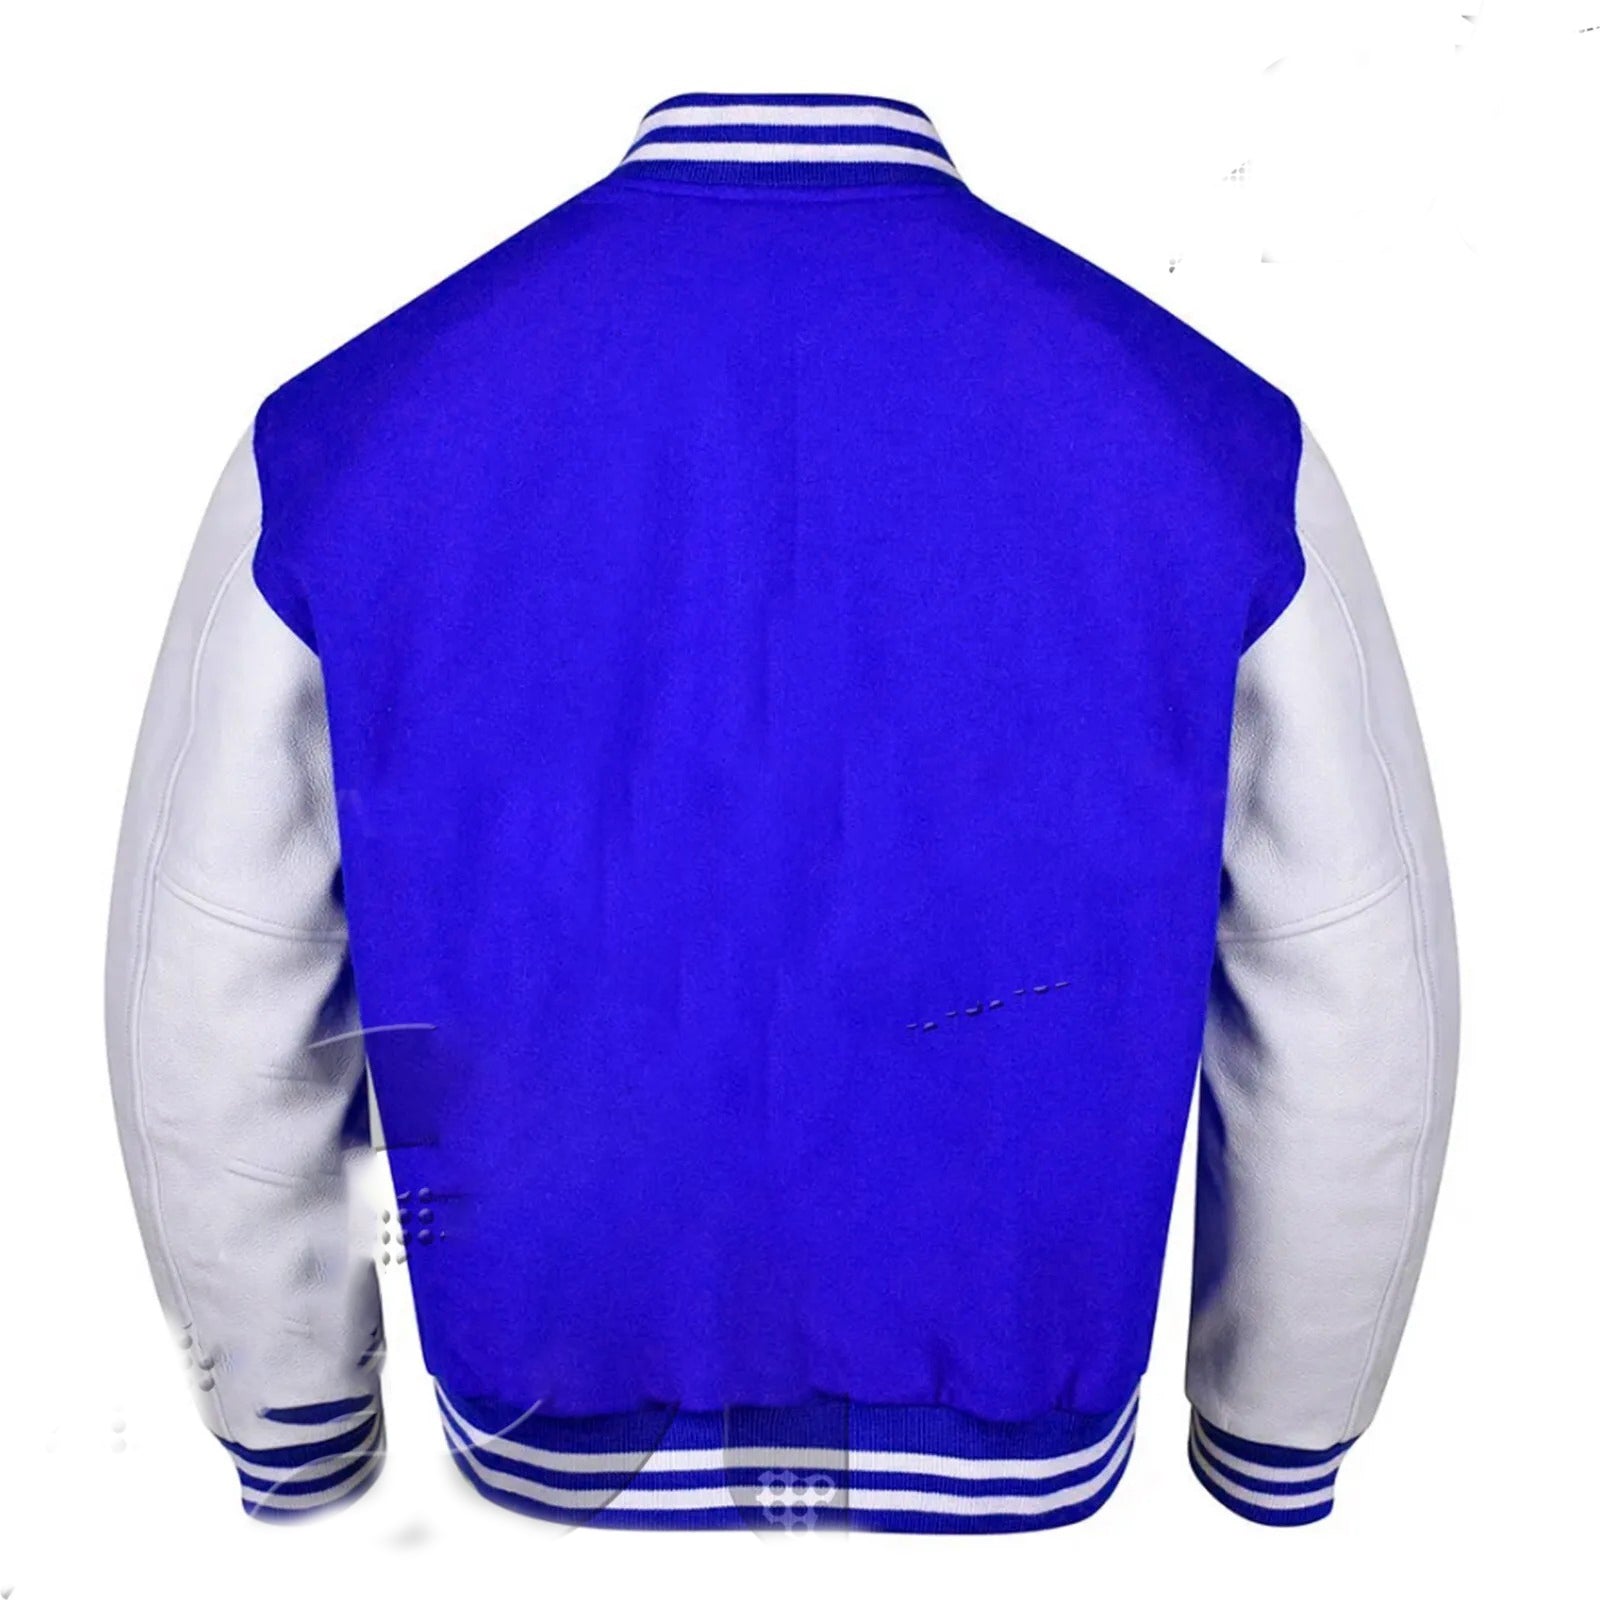 Varsity Letterman Bomber Royal Wool & White Real Cowhide Leather Sleeves Jackets